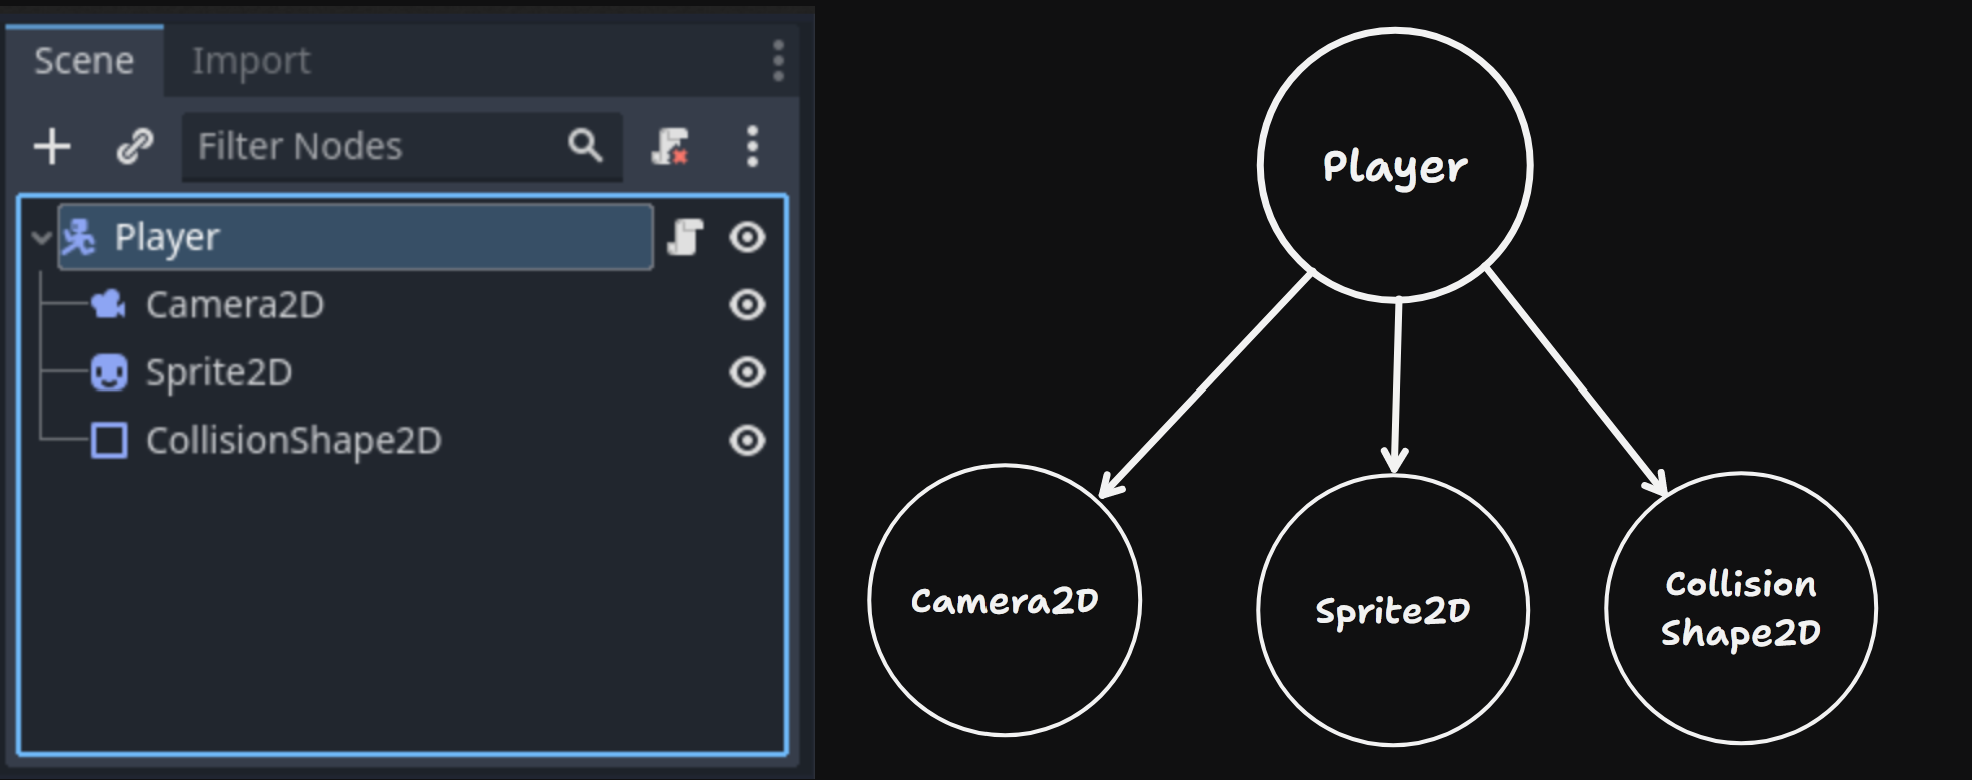 Node and tree structure of Godot